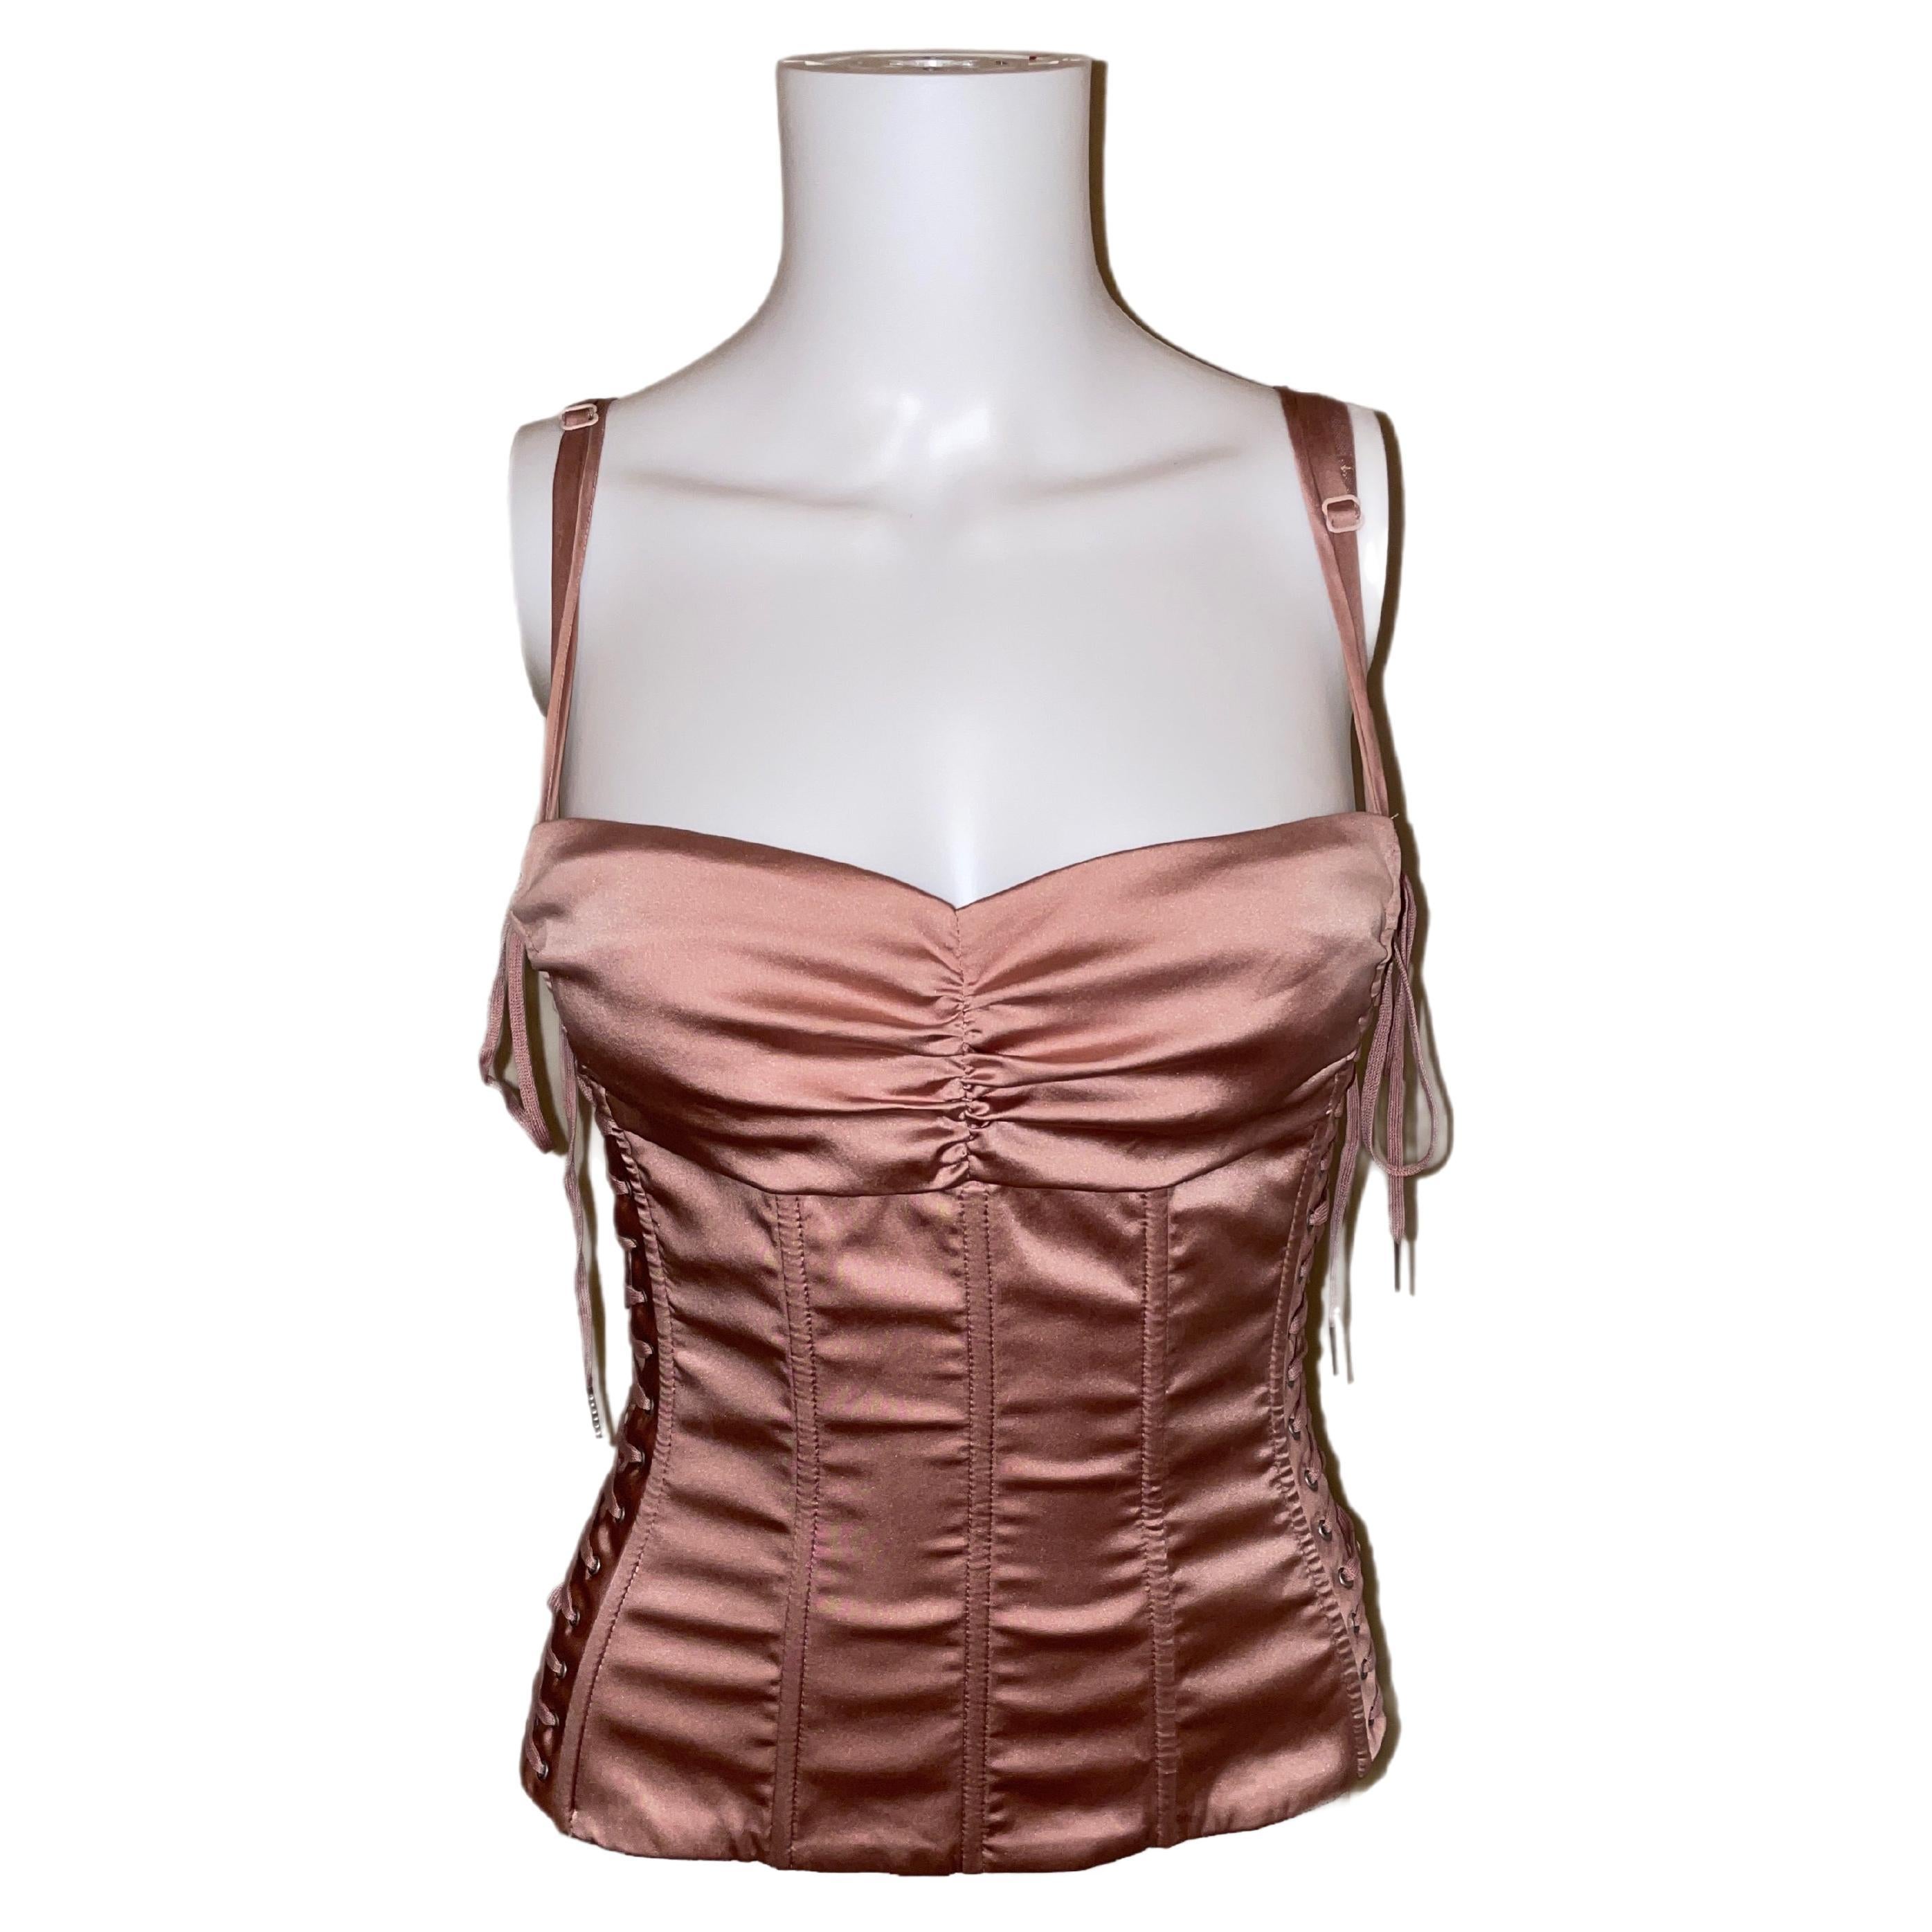 DOLCE & GABBANA 2003 sex collection hard boned lace up pink corset